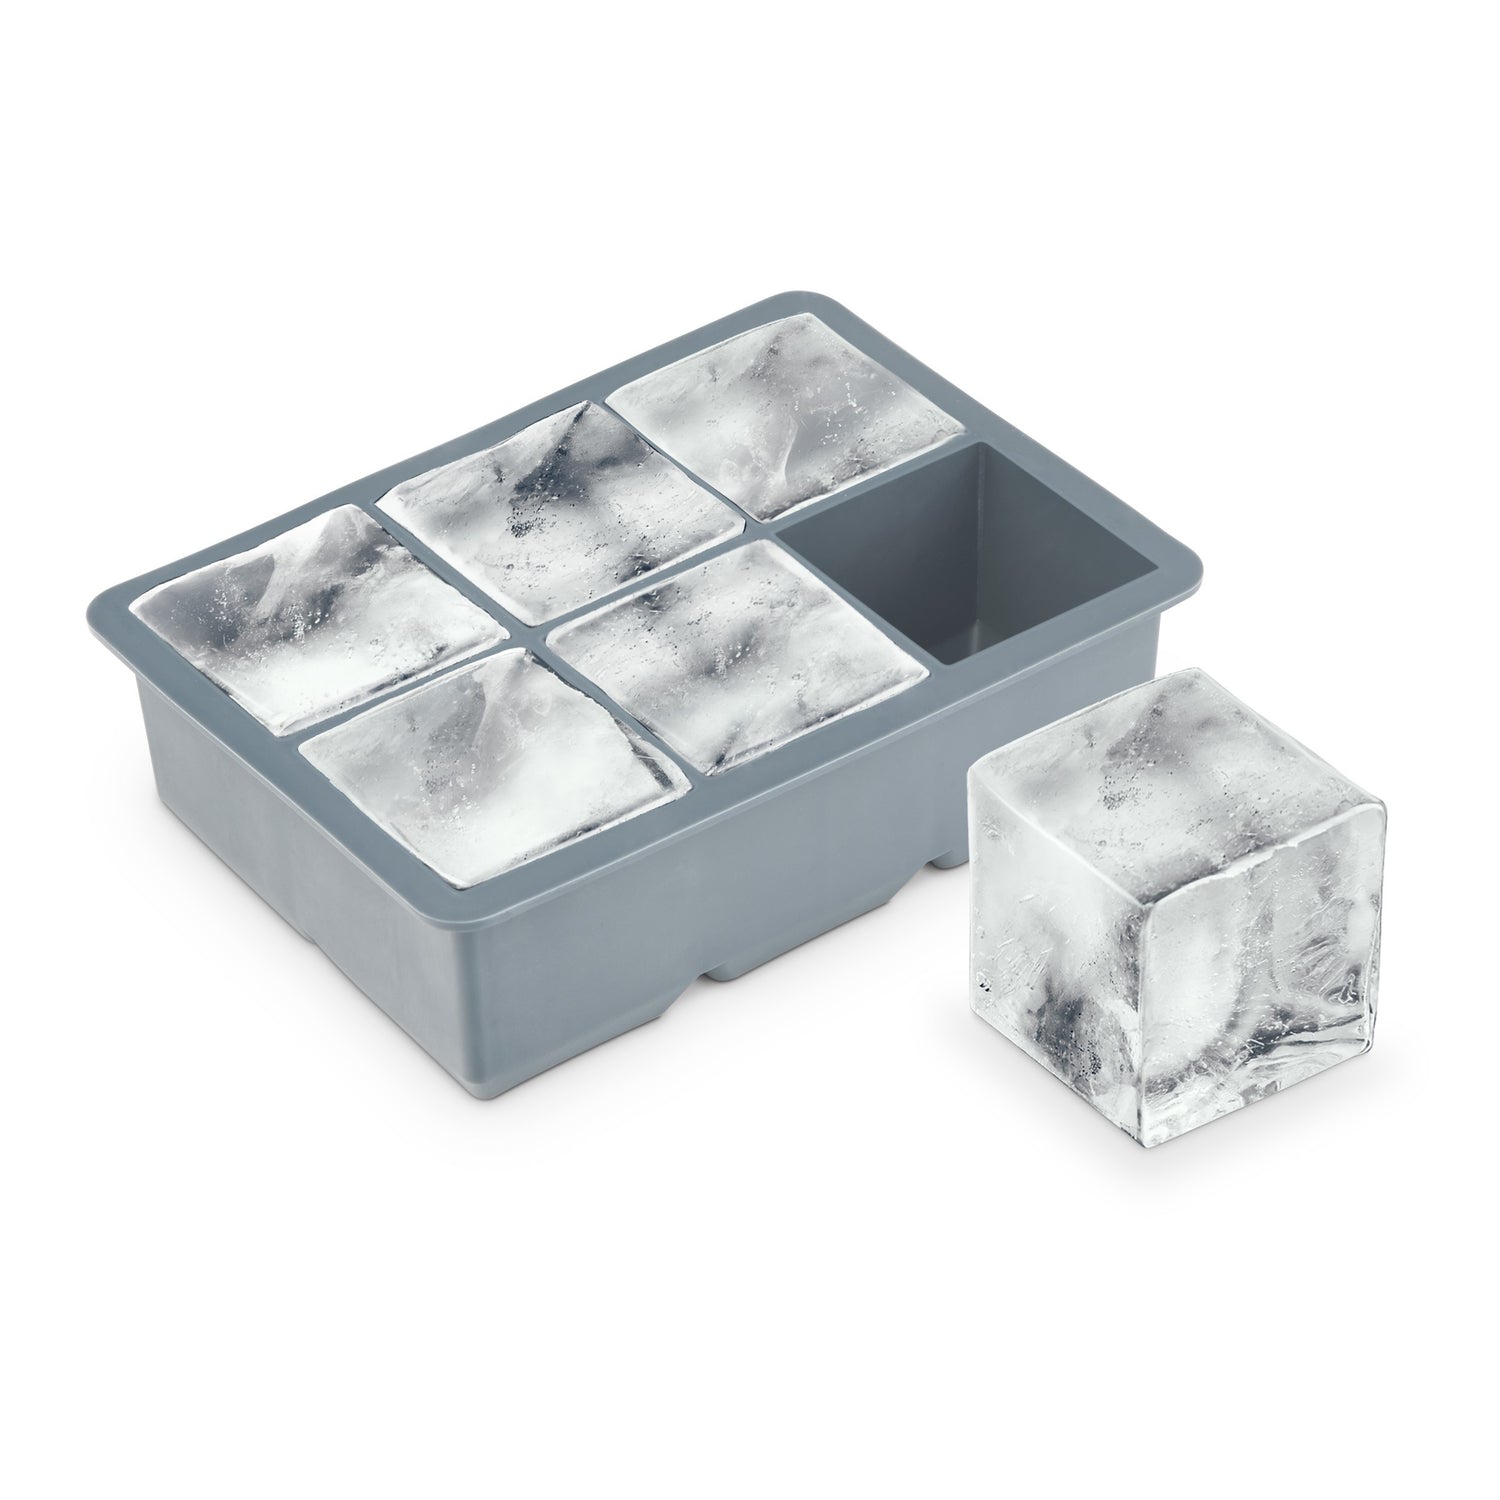 Final Touch Silicone Ice Cube Mold Makes Six 2 Inch Cubes